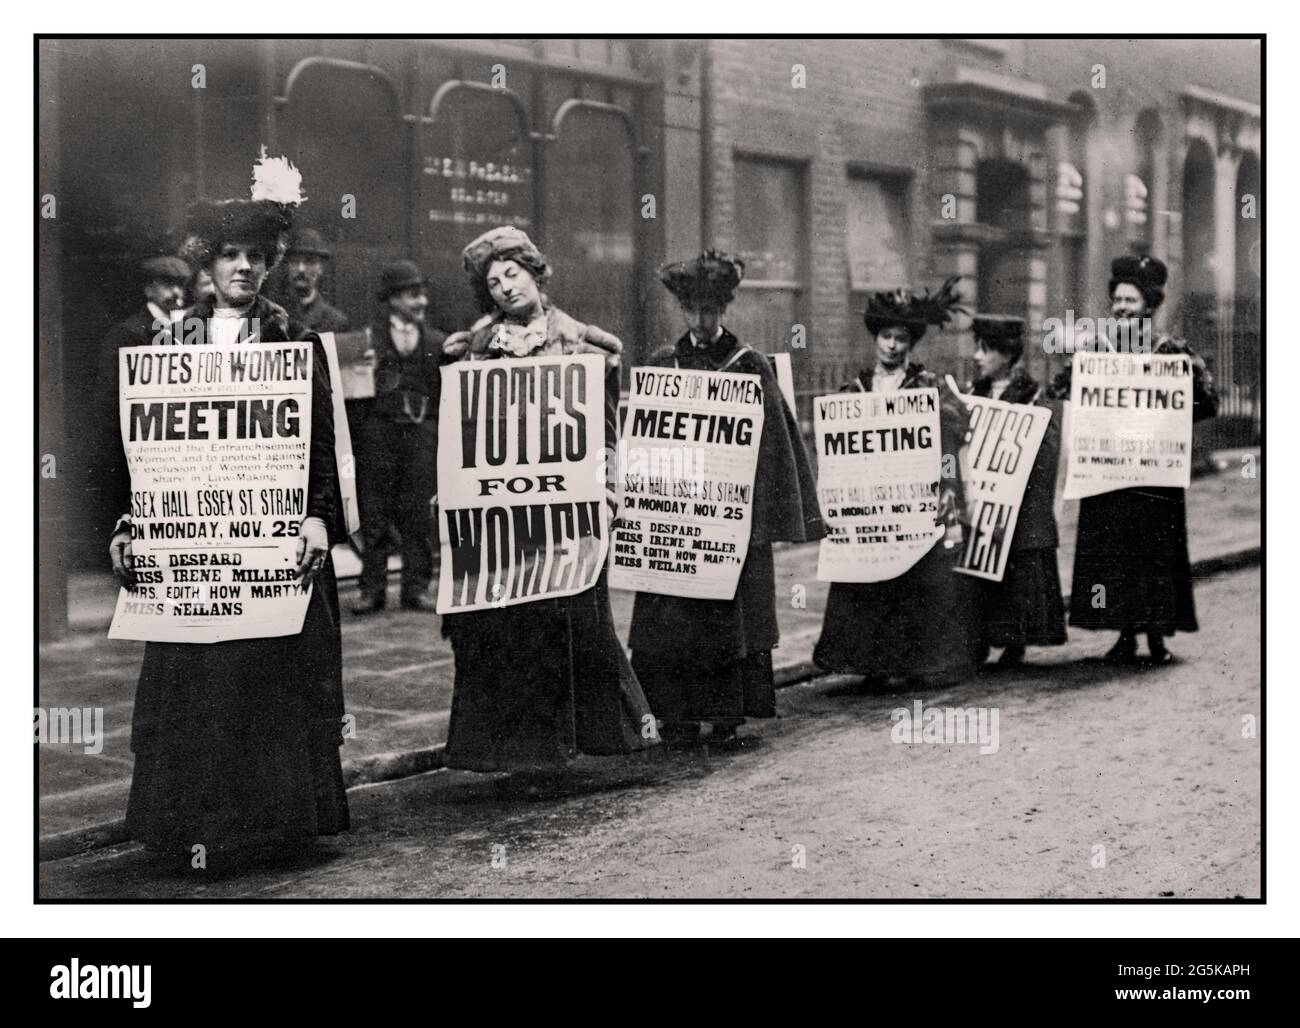 SUFFRAGE 1900’s London UK Suffragettes, campaigning holding posters in London promoting and advertising British Suffrage ‘Meeting’’  ‘Votes for Women’ at Essex Hall Essex Street Strand London UK Stock Photo